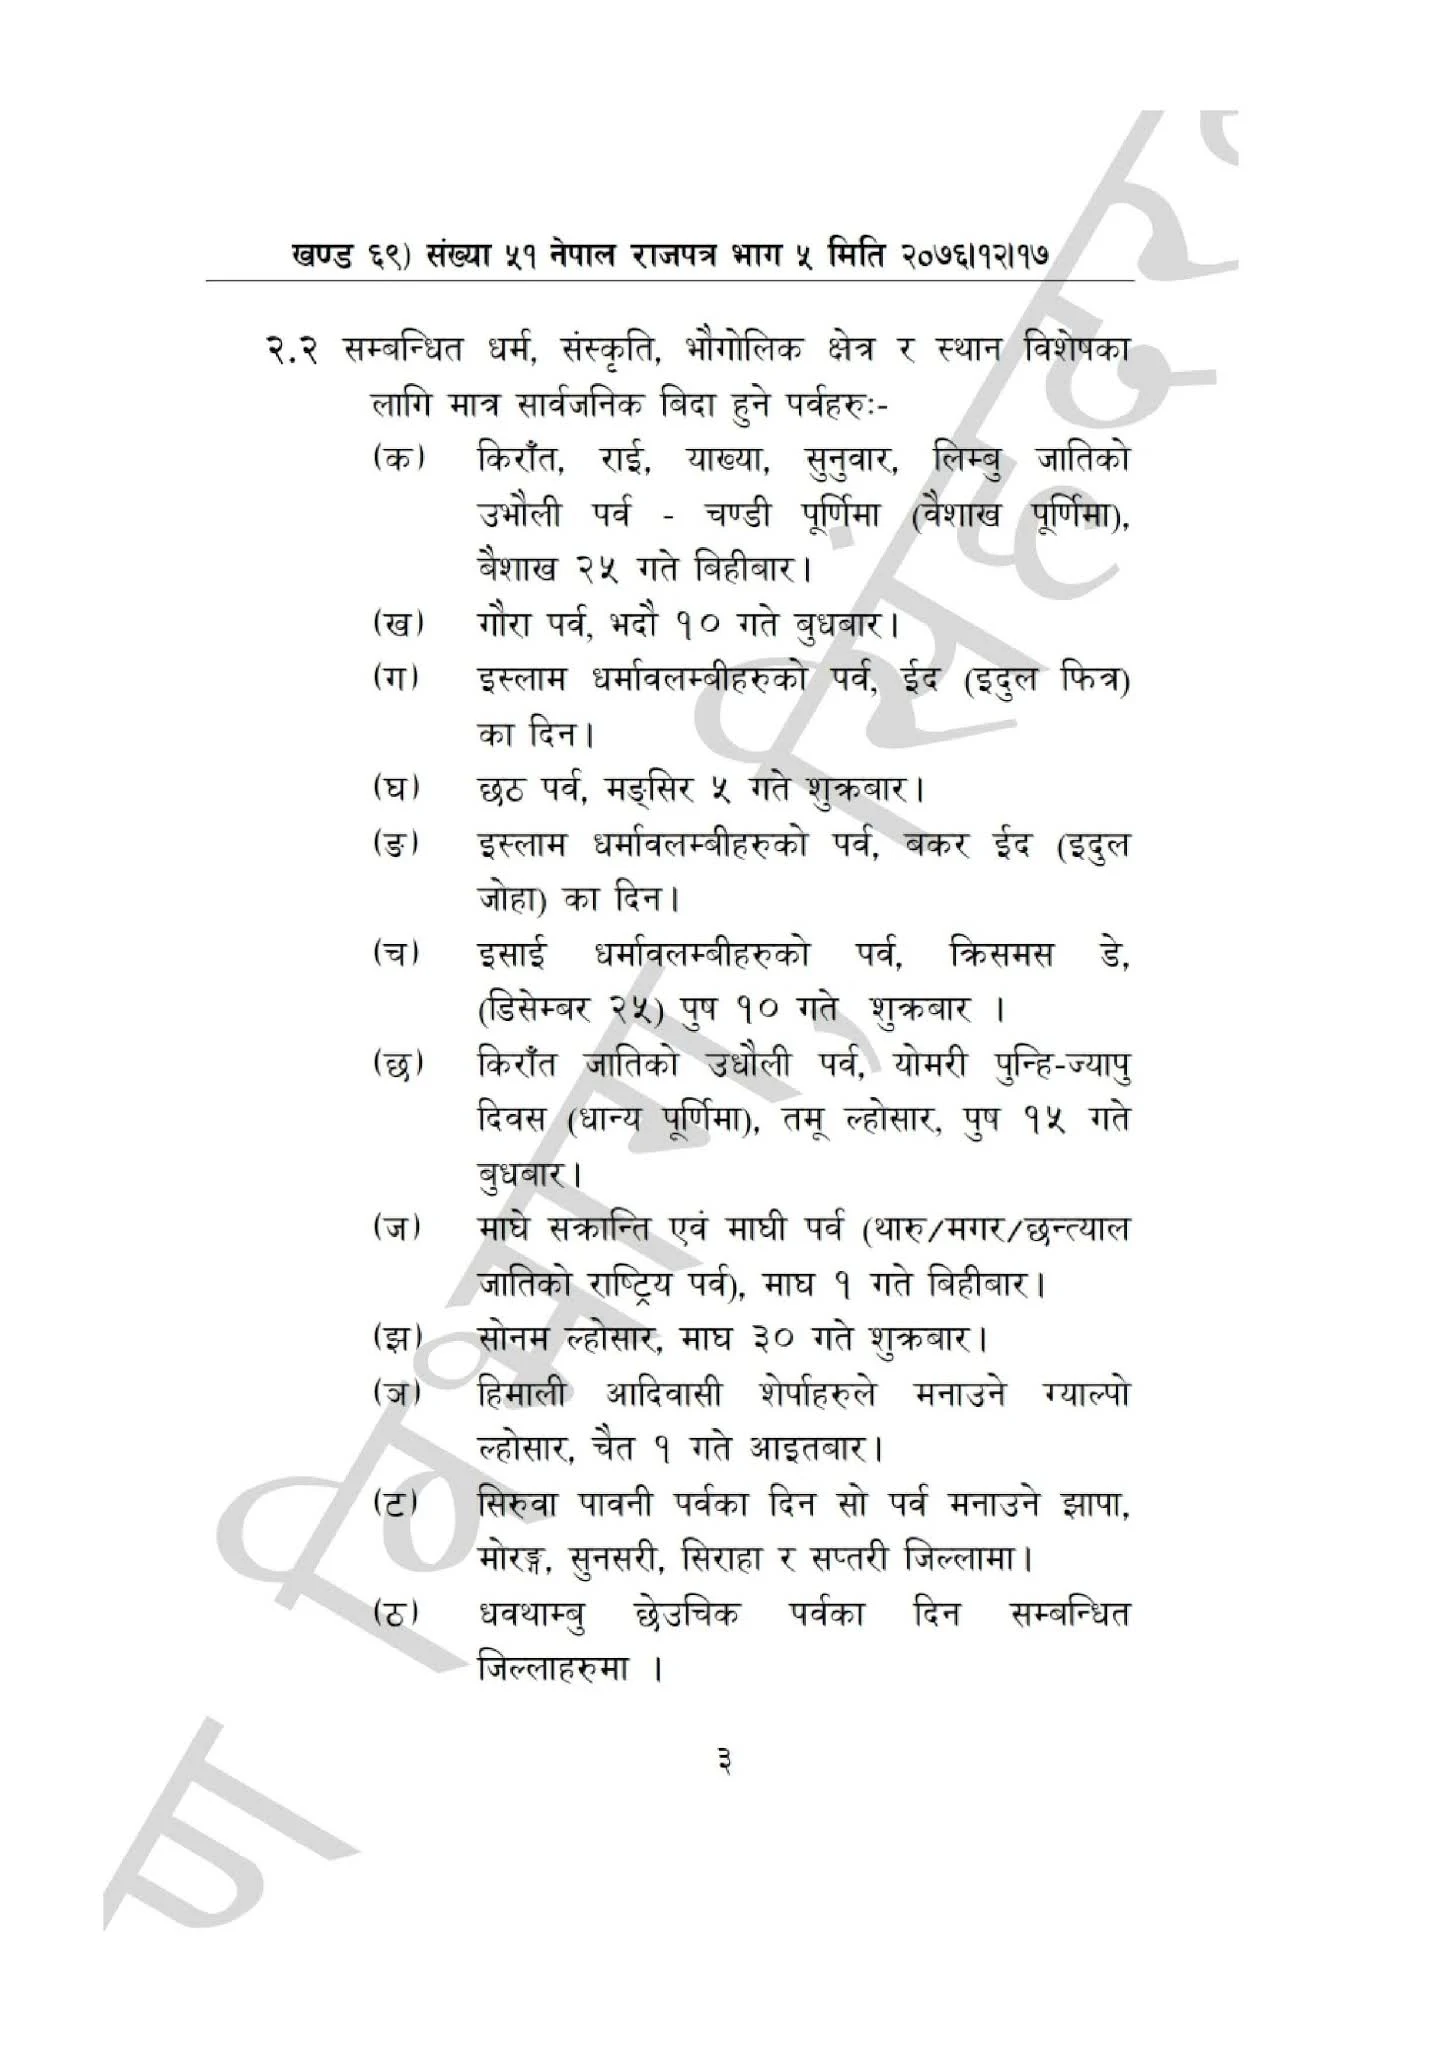 List of Public Holidays in Nepal for 2077